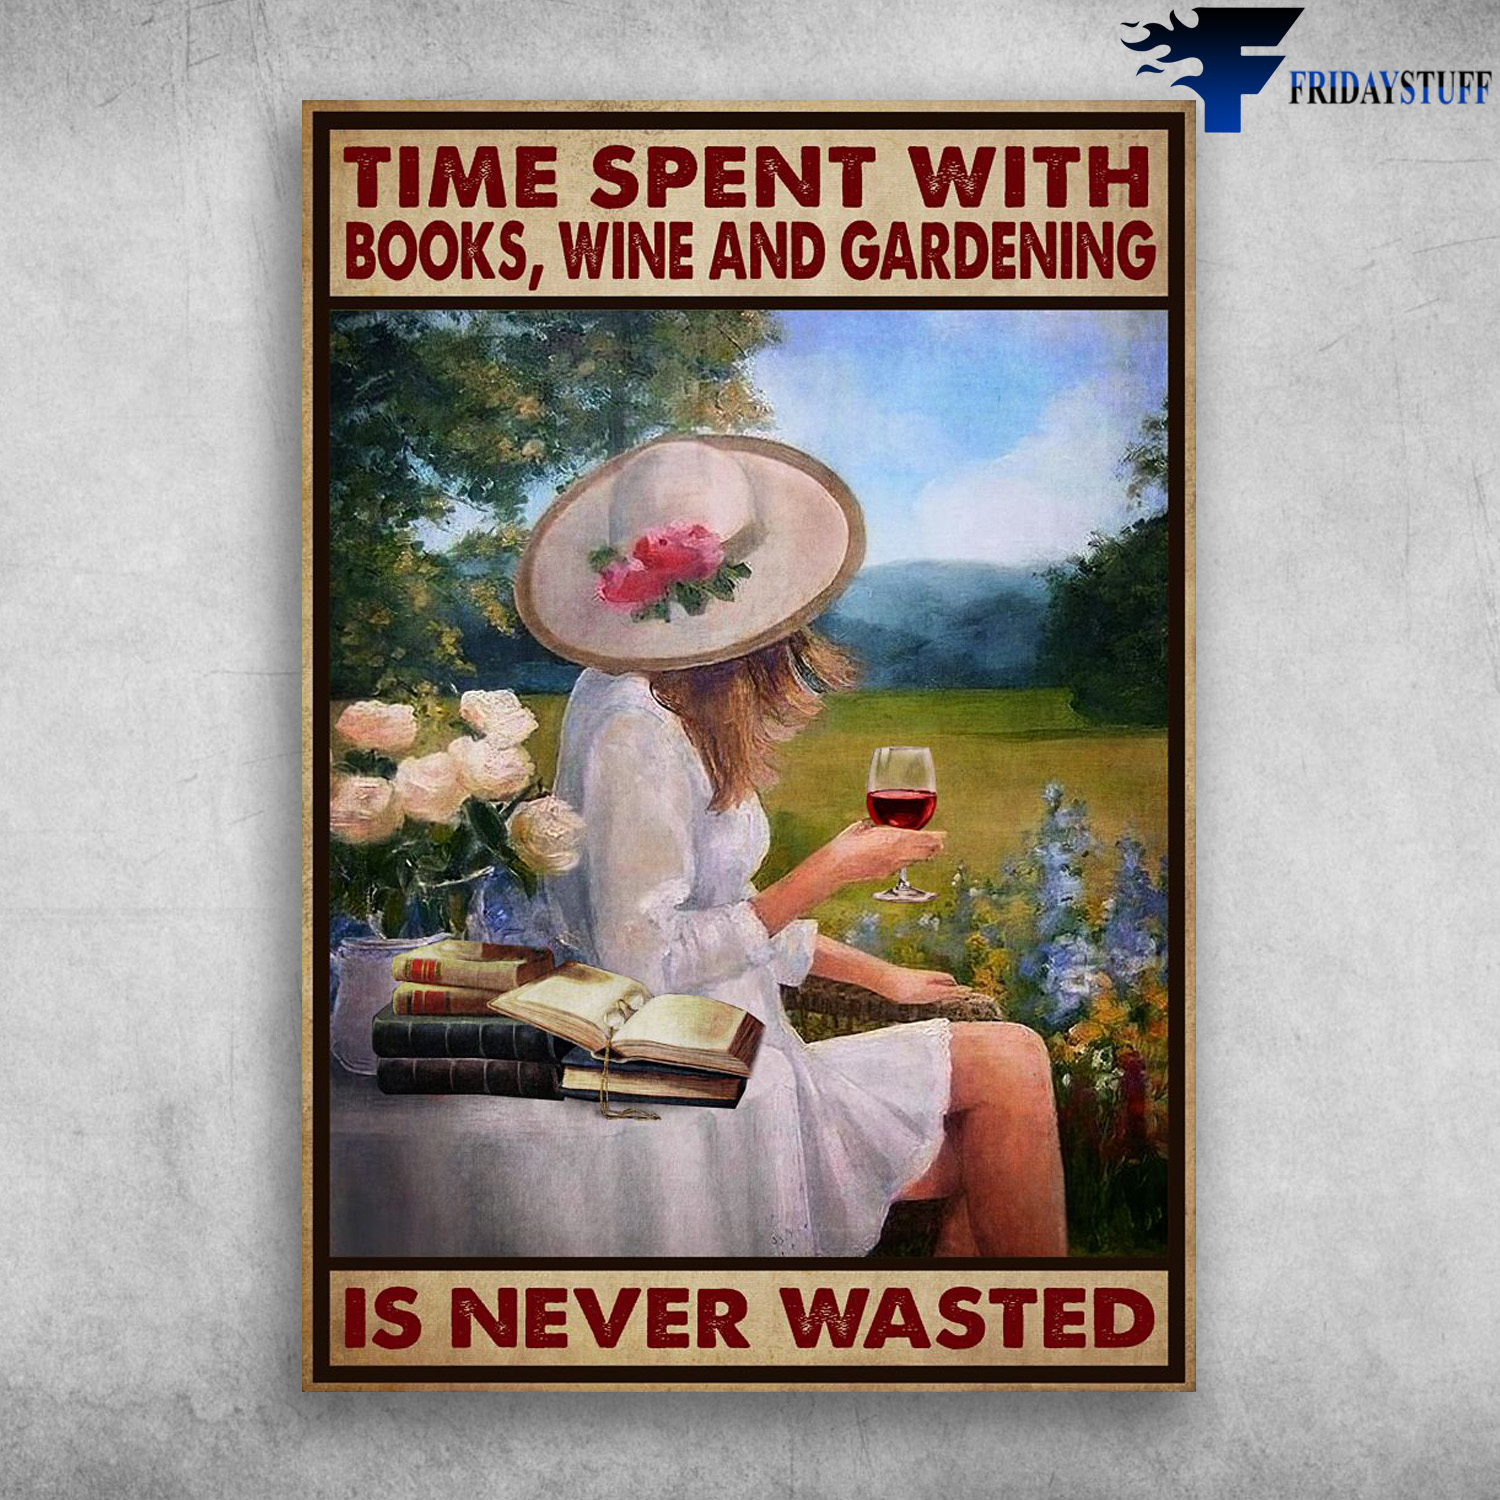 Girl Loves Book, Wine And Gardening - Time Spent With Books, Wine And Gardening, Is Never Wasted